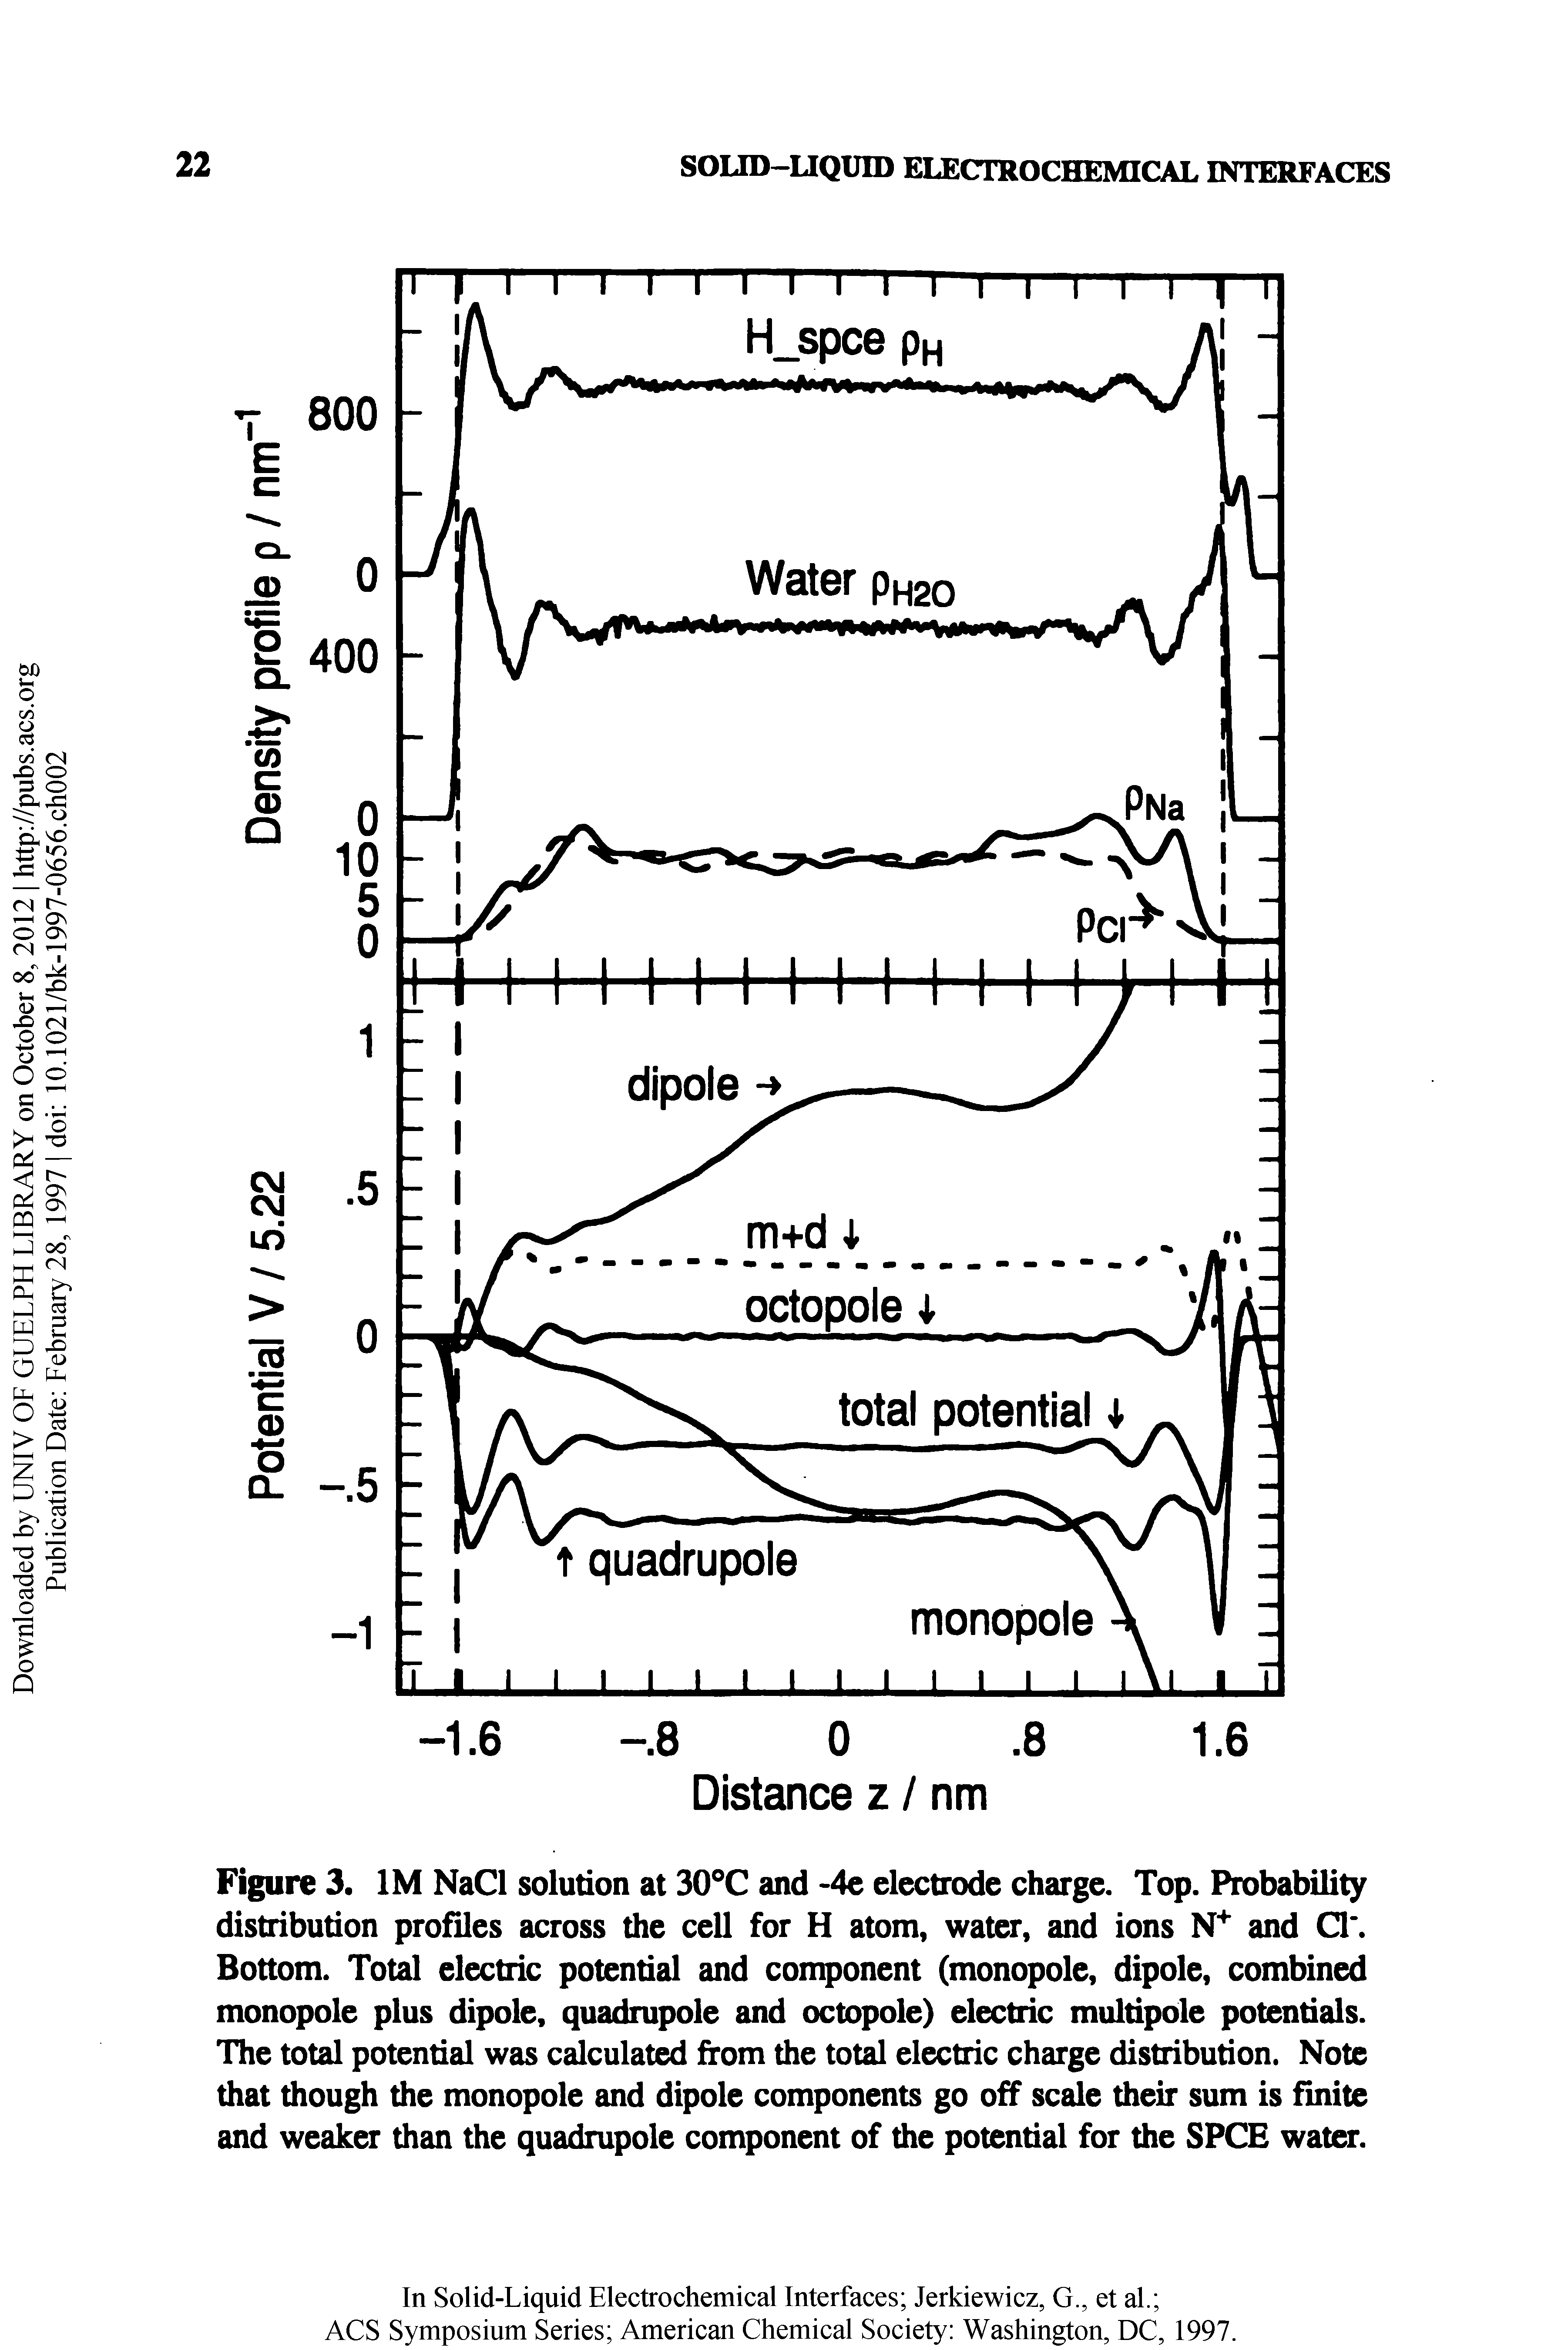 Figure 3. IM NaCl solution at 30°C and -4e electrode charge. Top. Probability distribution profiles across the cell for H atom, water, and ions and Cl Bottom. Total electric potential and component (monopole, dipole, combined monopole plus dipole, quadnipole and octopole) electric multipole potentials. The total potential was calculated from the total electric charge distribution. Note that though the monopole and dipole components go off scale their sum is finite and weaker than the quadnipole component of the potential for the SPCE water.